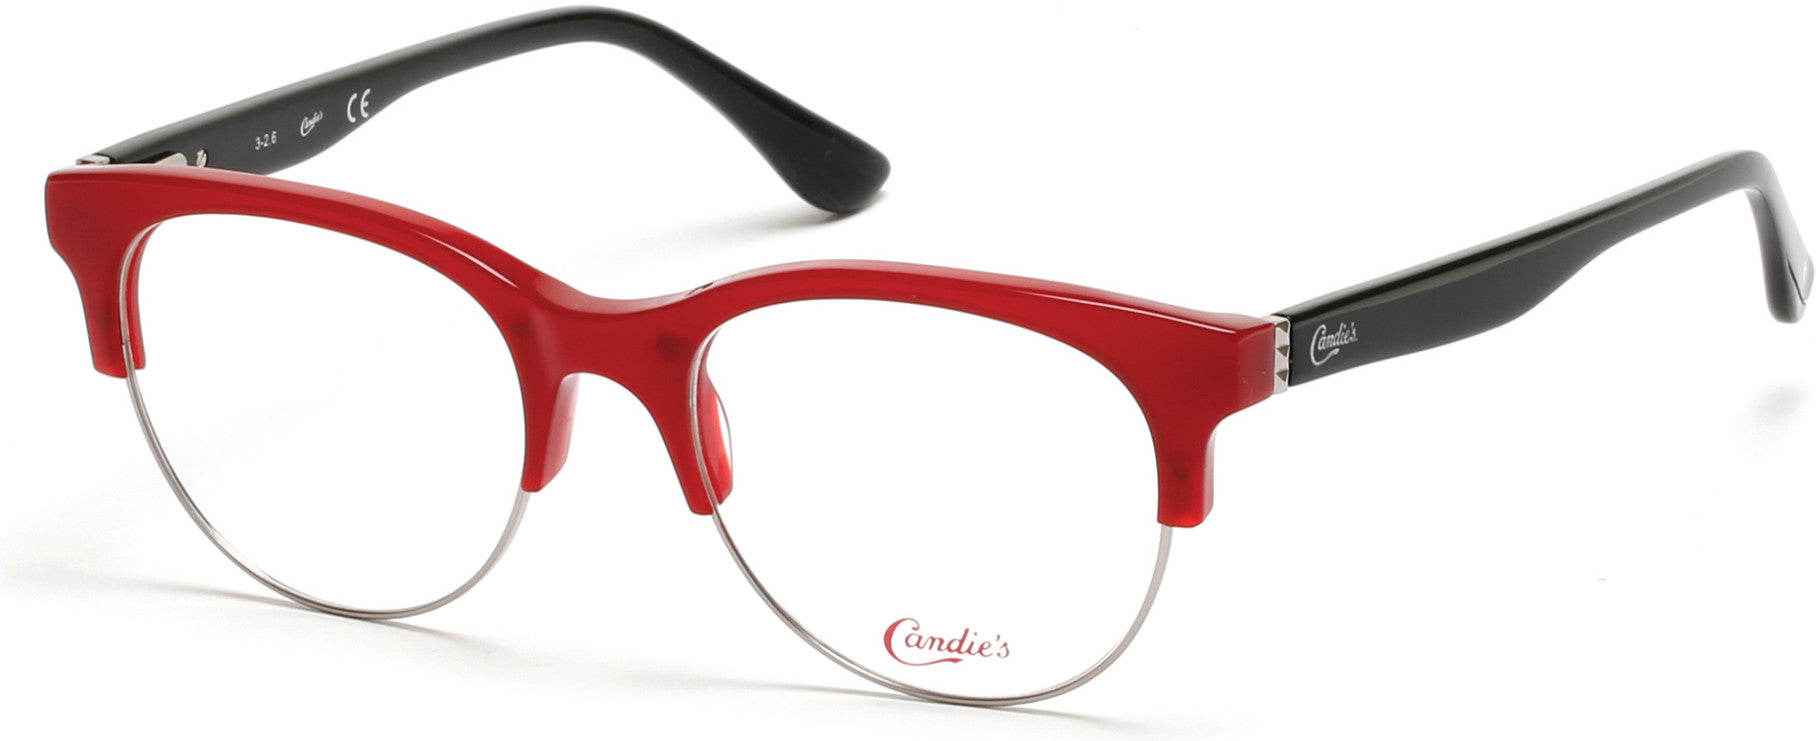 Candies CA0144 Eyeglasses 068-068 - Red/other